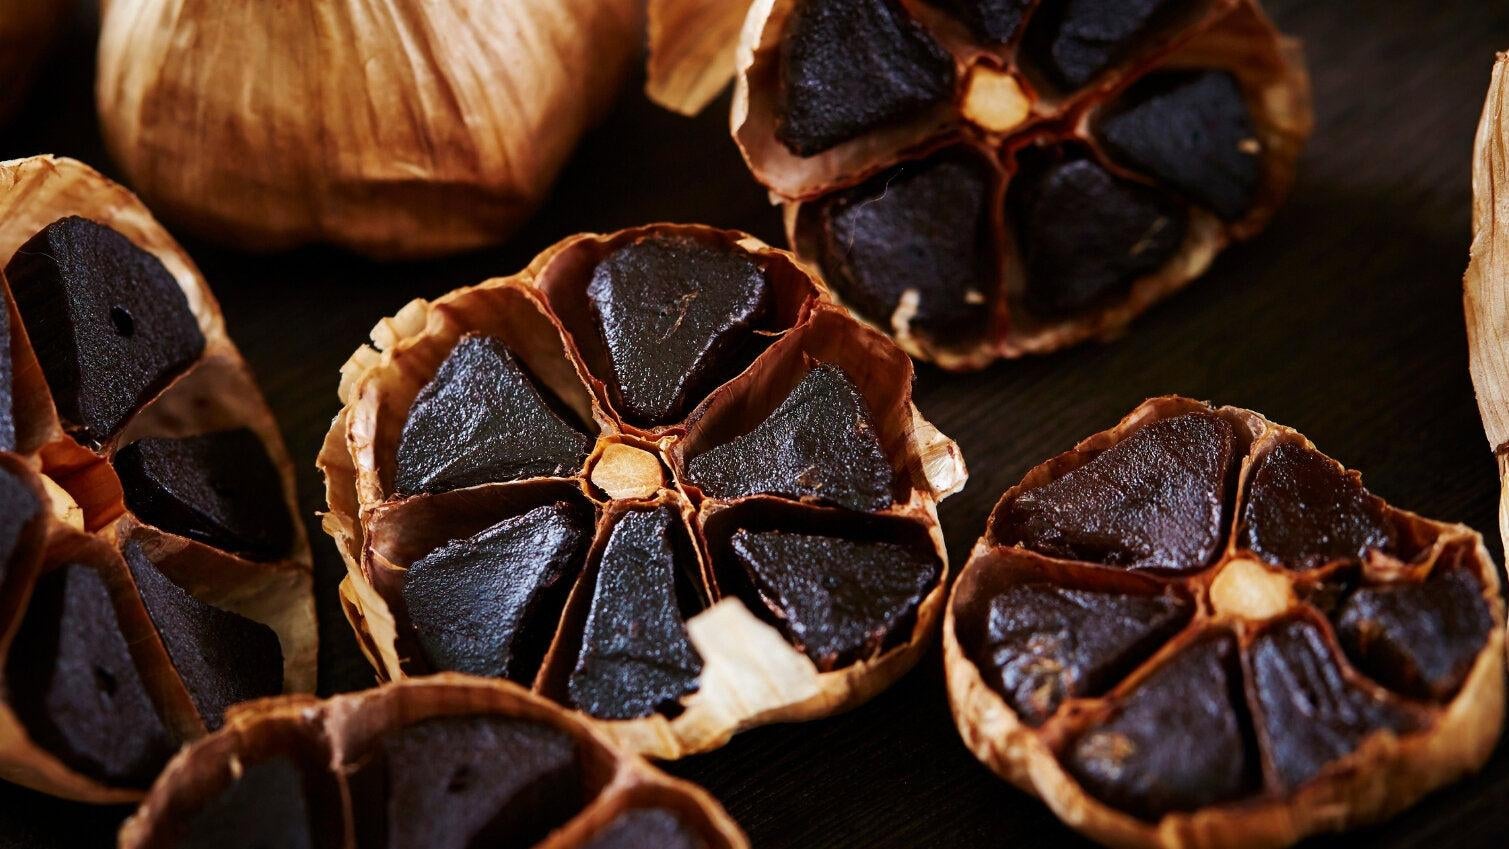 This Black Garlic Tastes Sweet and Won’t Give You Bad Breath, Scientists Say